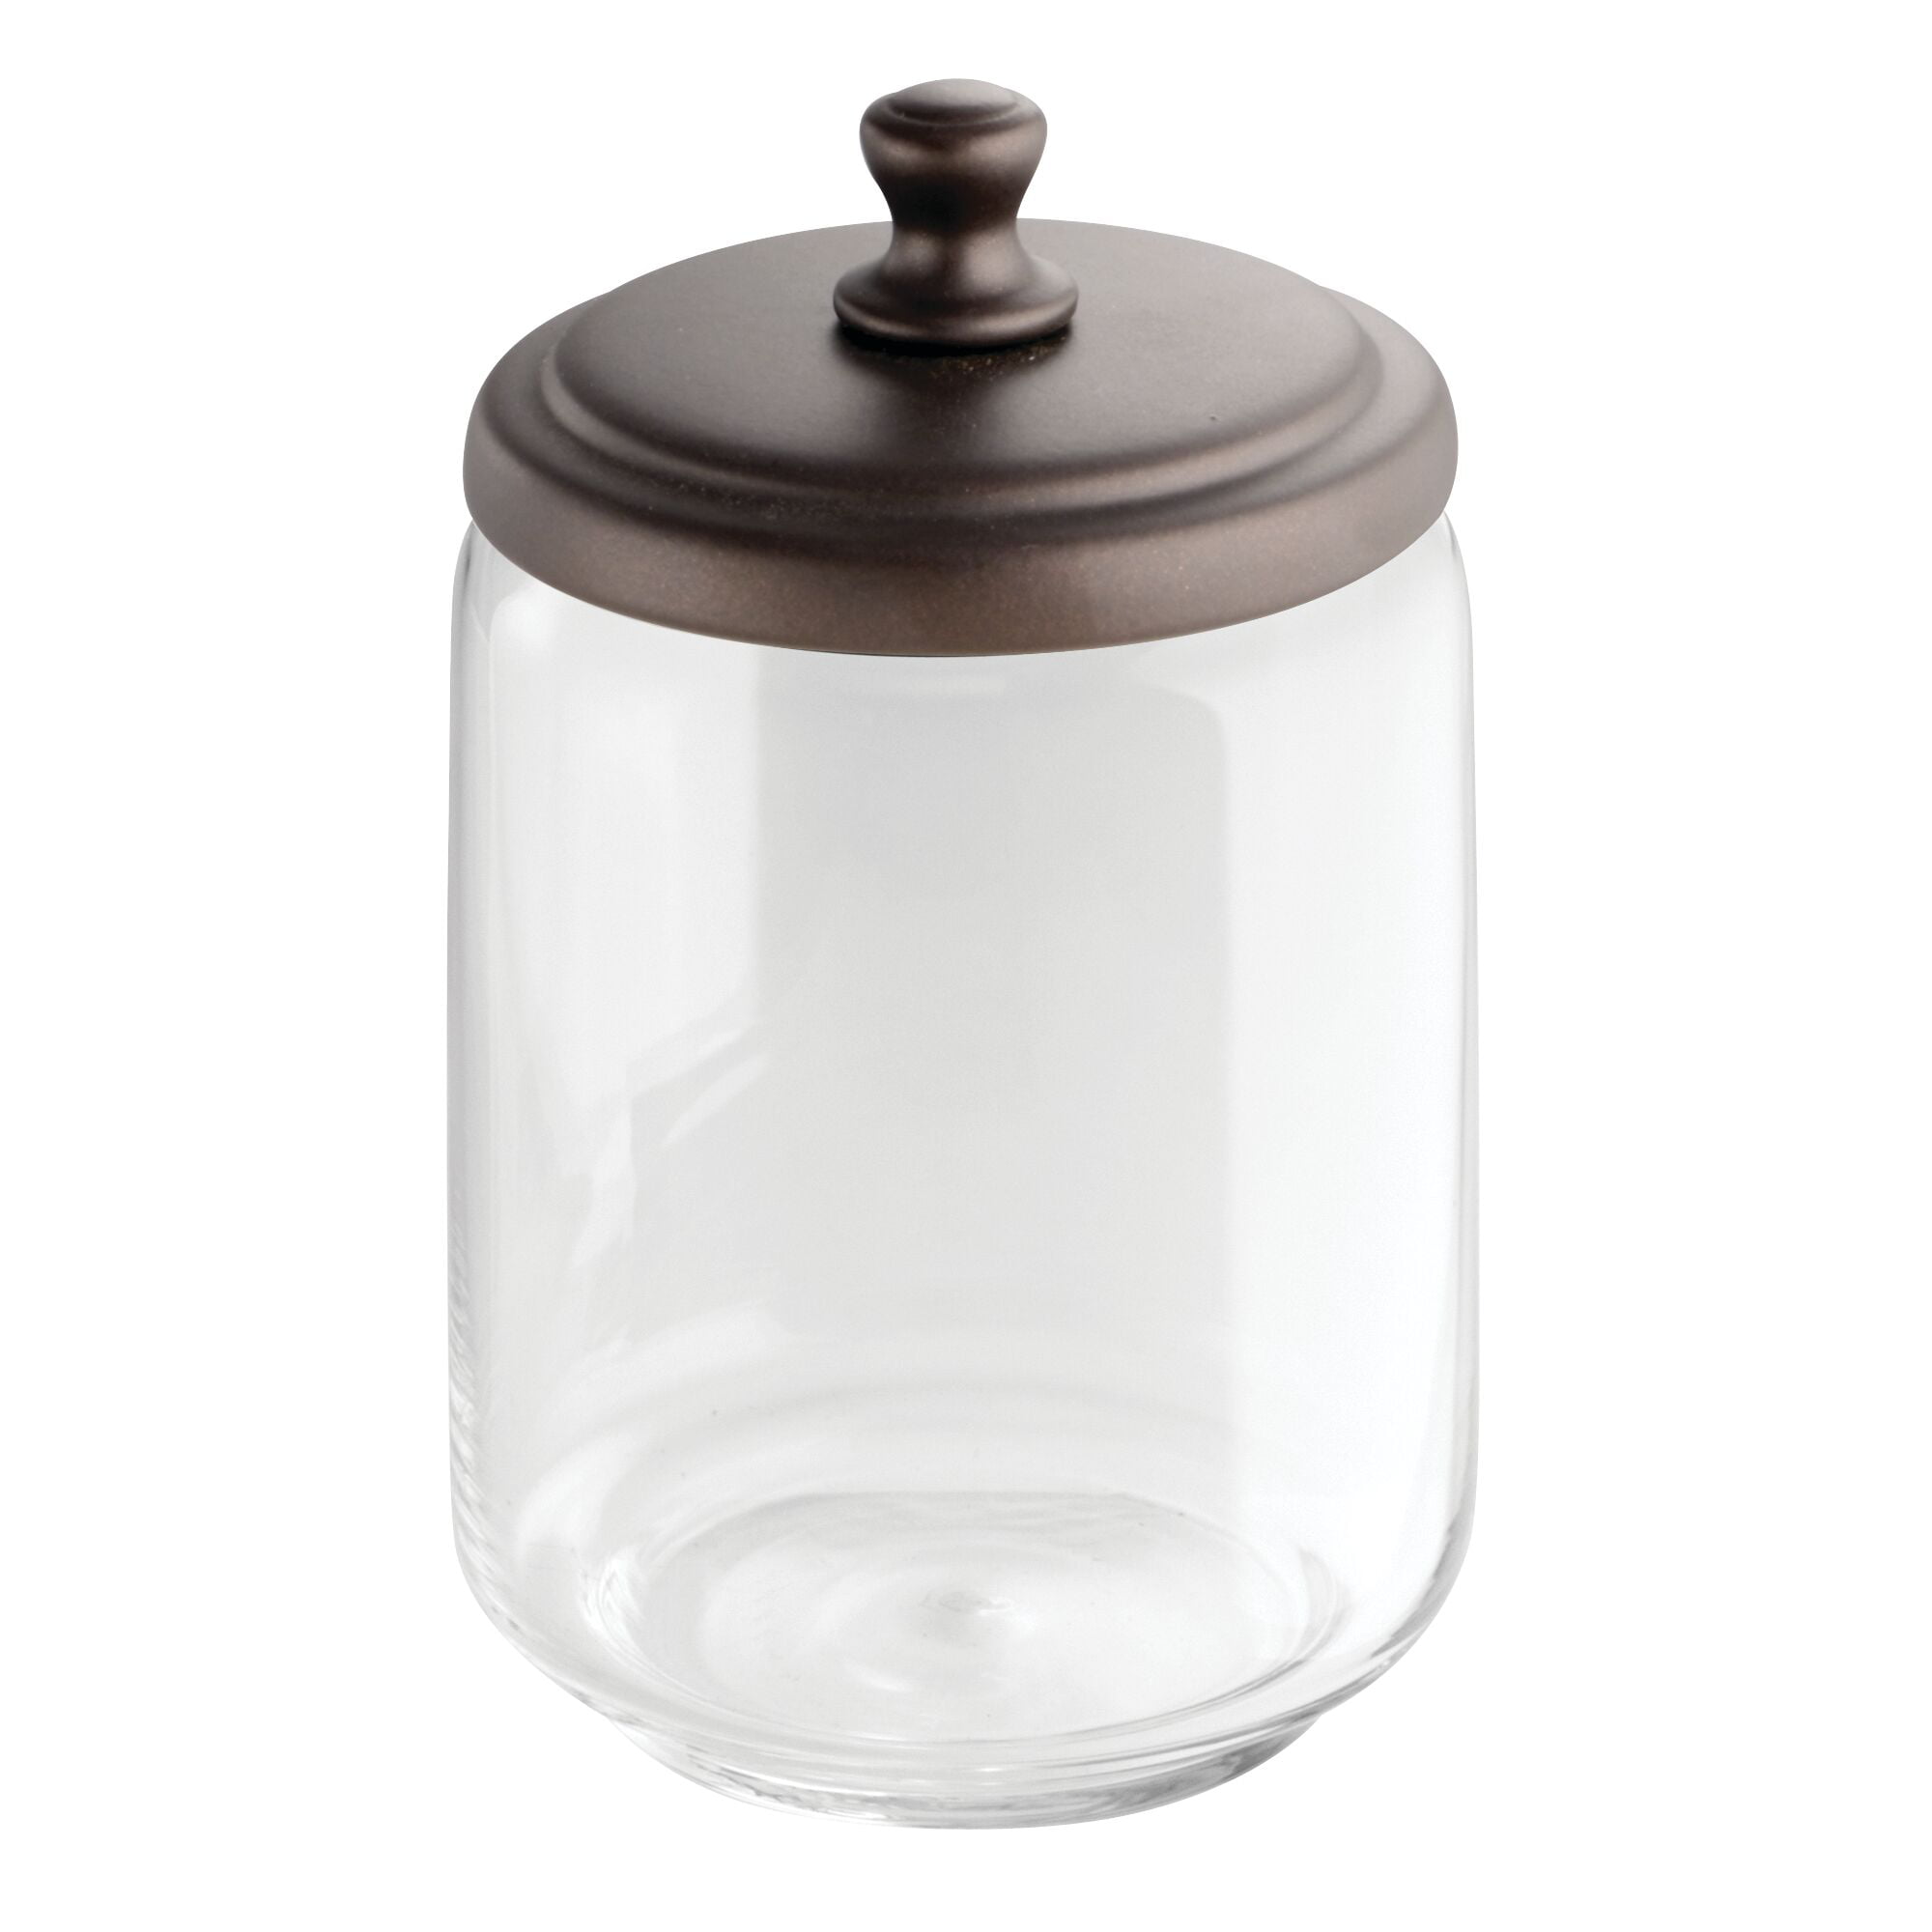 CLEAR GLASS APOTHECARY JARS W/LIDS – Montana Rustic Accents